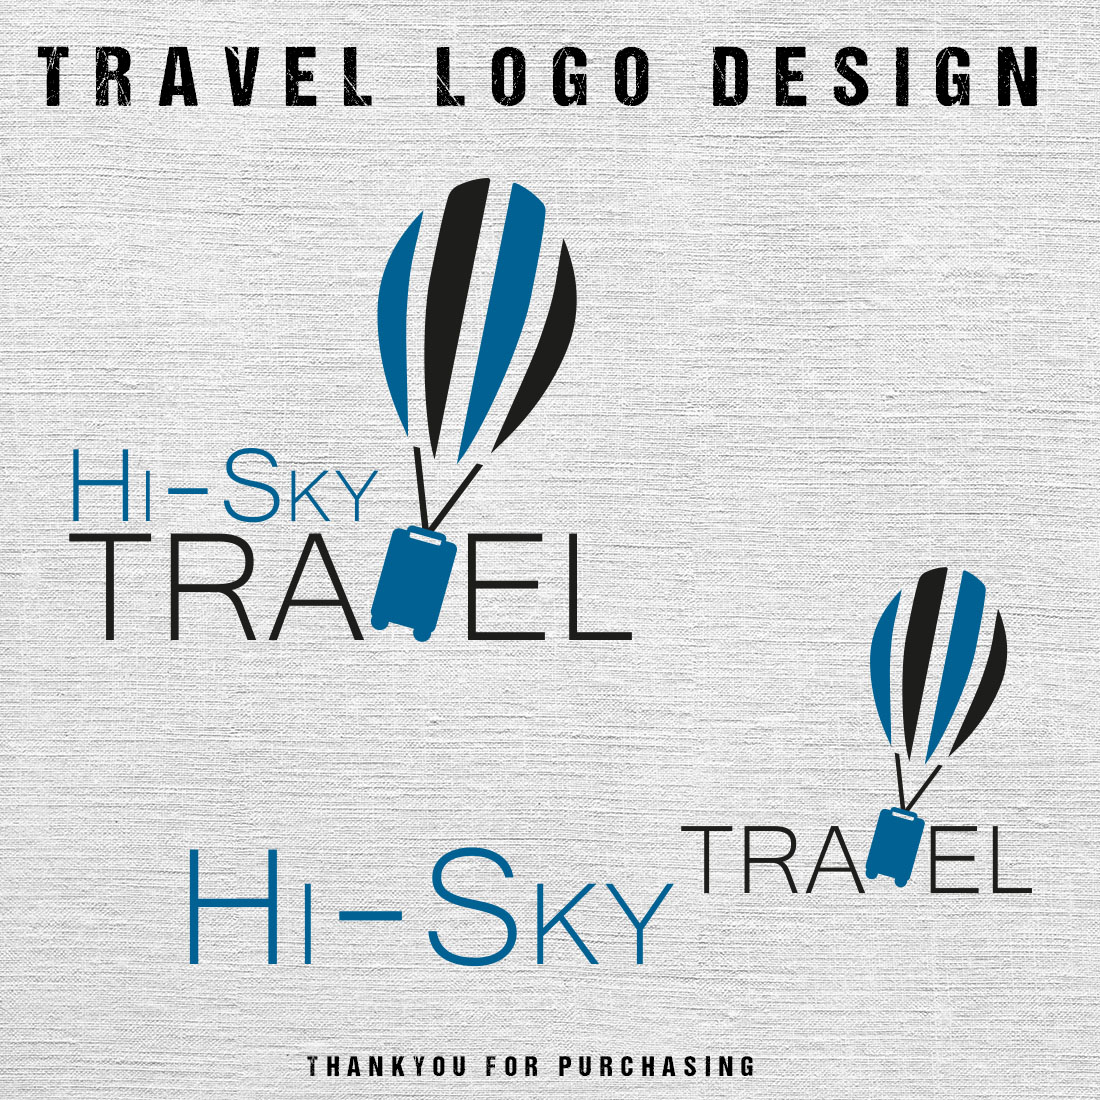 Travelling Logo Design Template cover image.